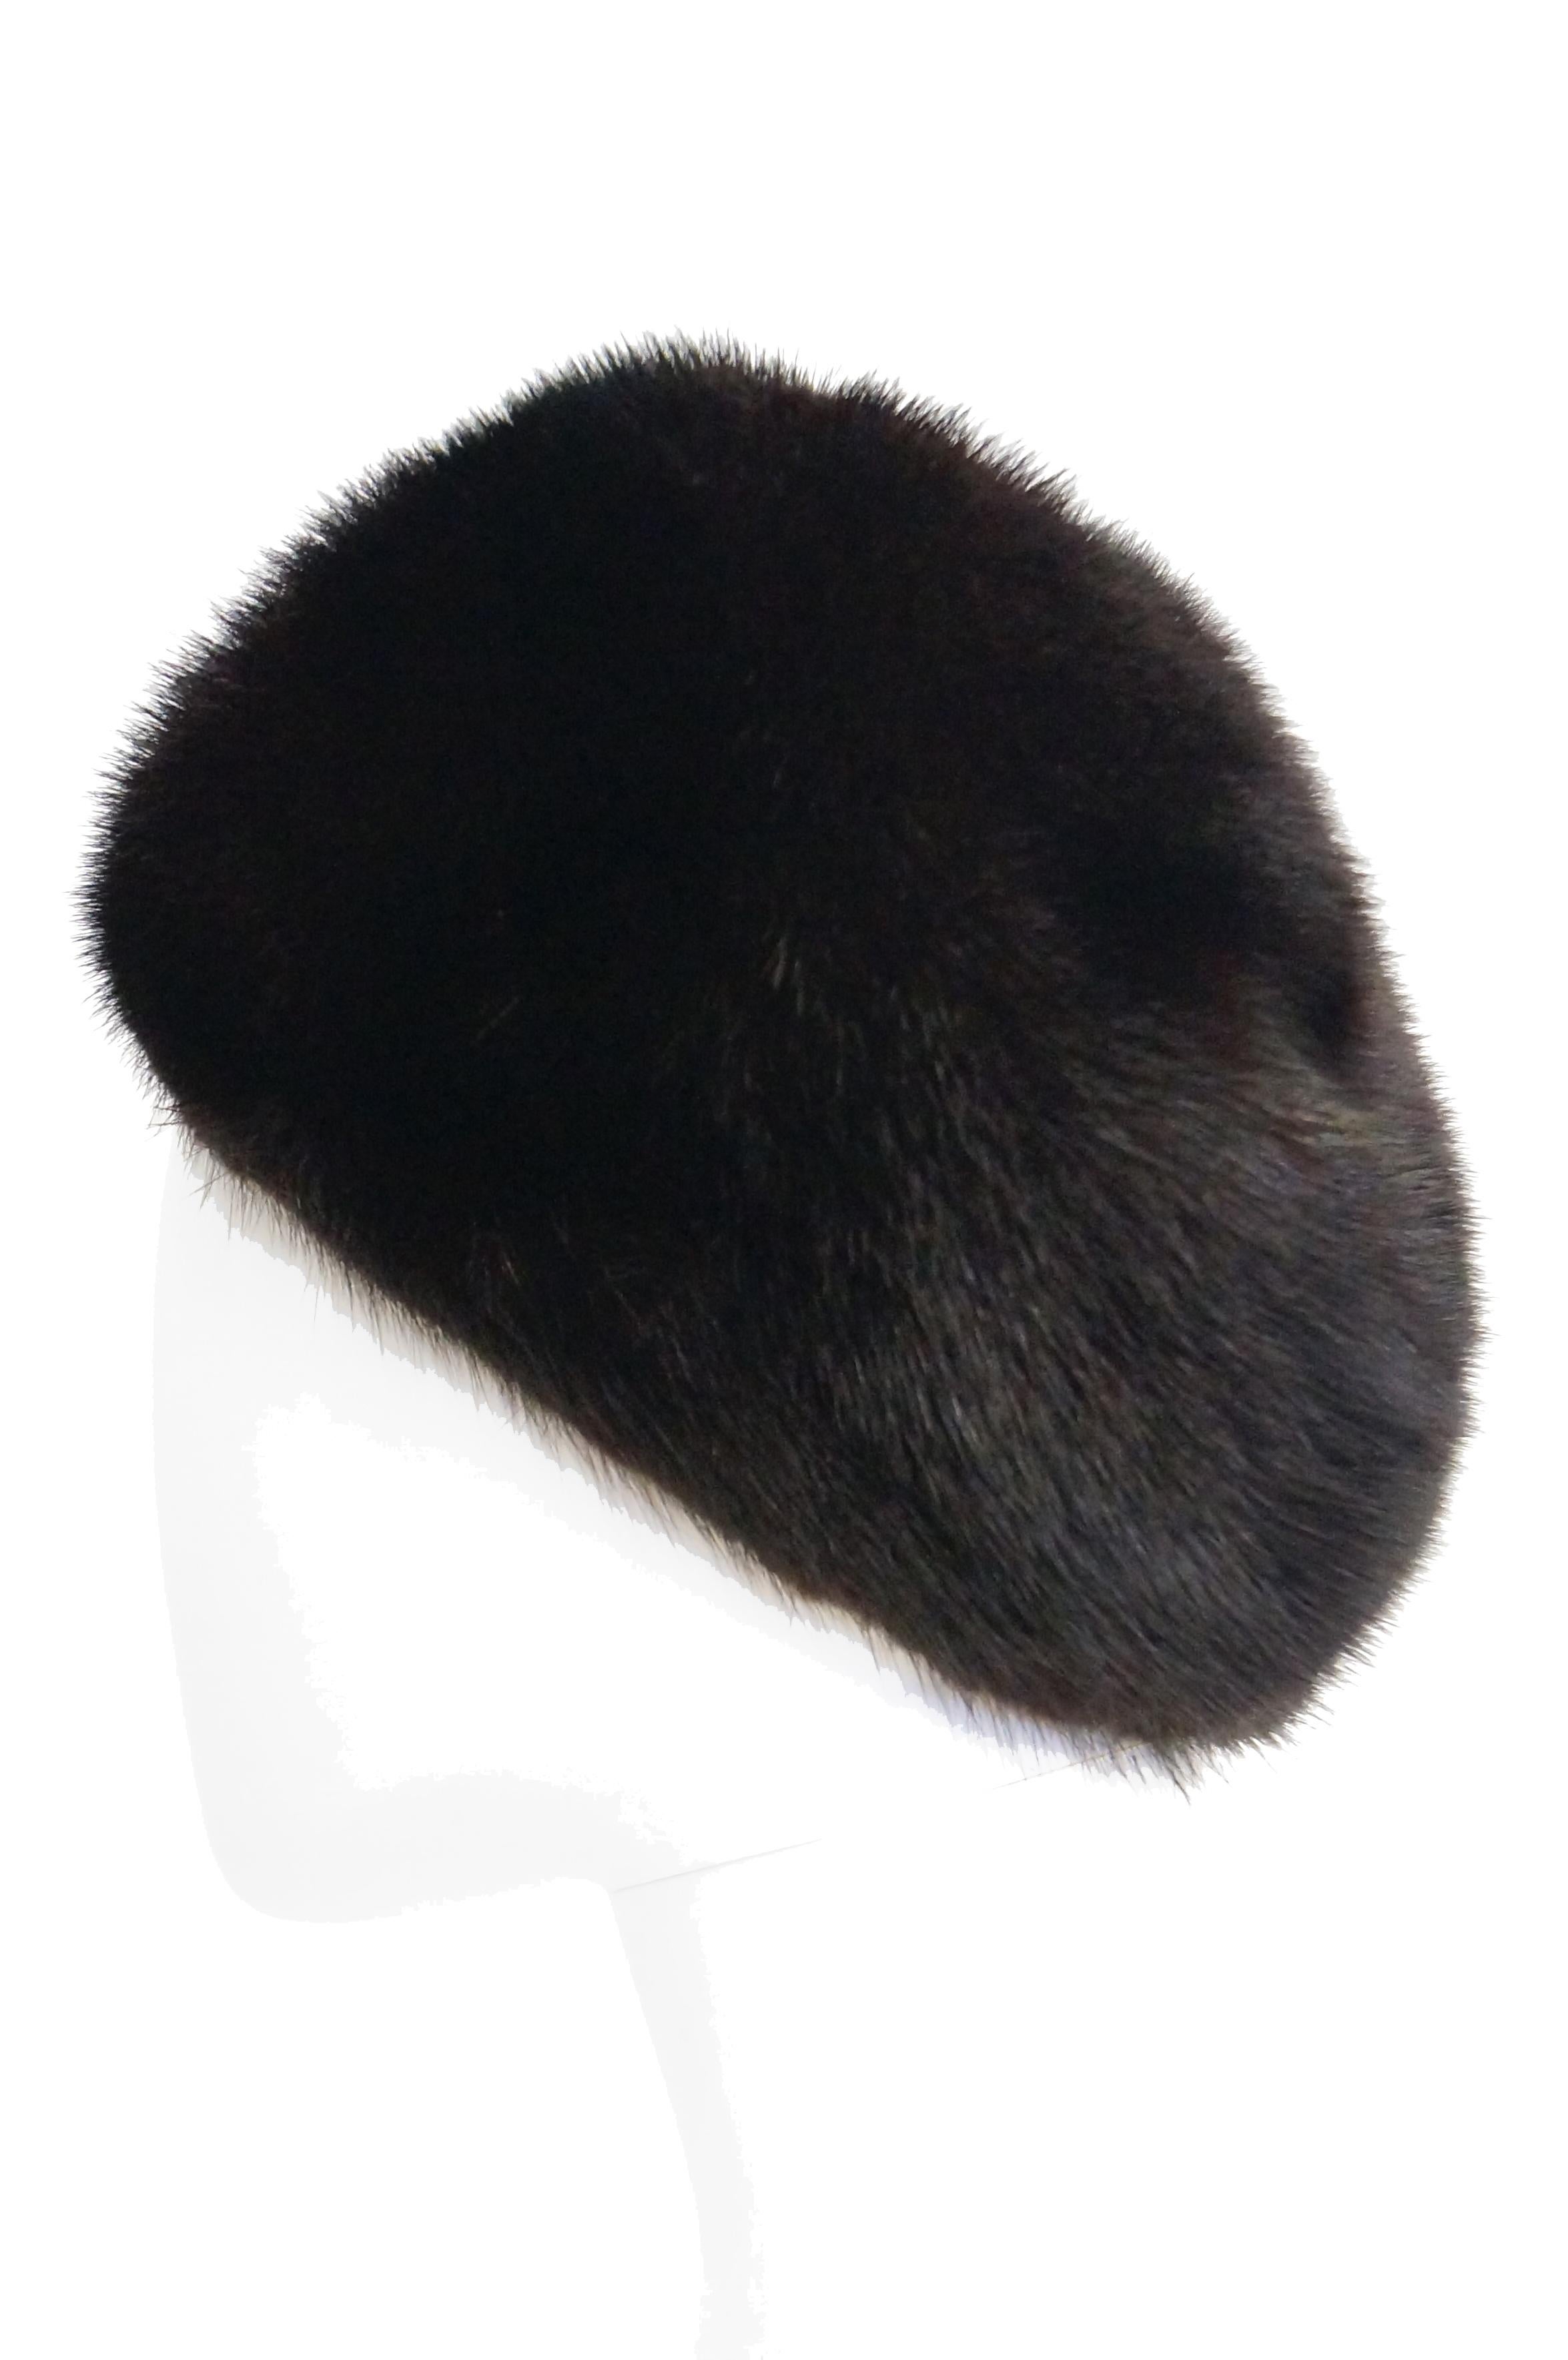 Beautiful dark espresso brown hat by Christian Dior Chapeaux. This mink hat has a rounded crown with gently sloping sides, long enough to keep the wearer's ears warm! Lined and features a grosgrain ribbon. The hat was sold at Marshall Fields'